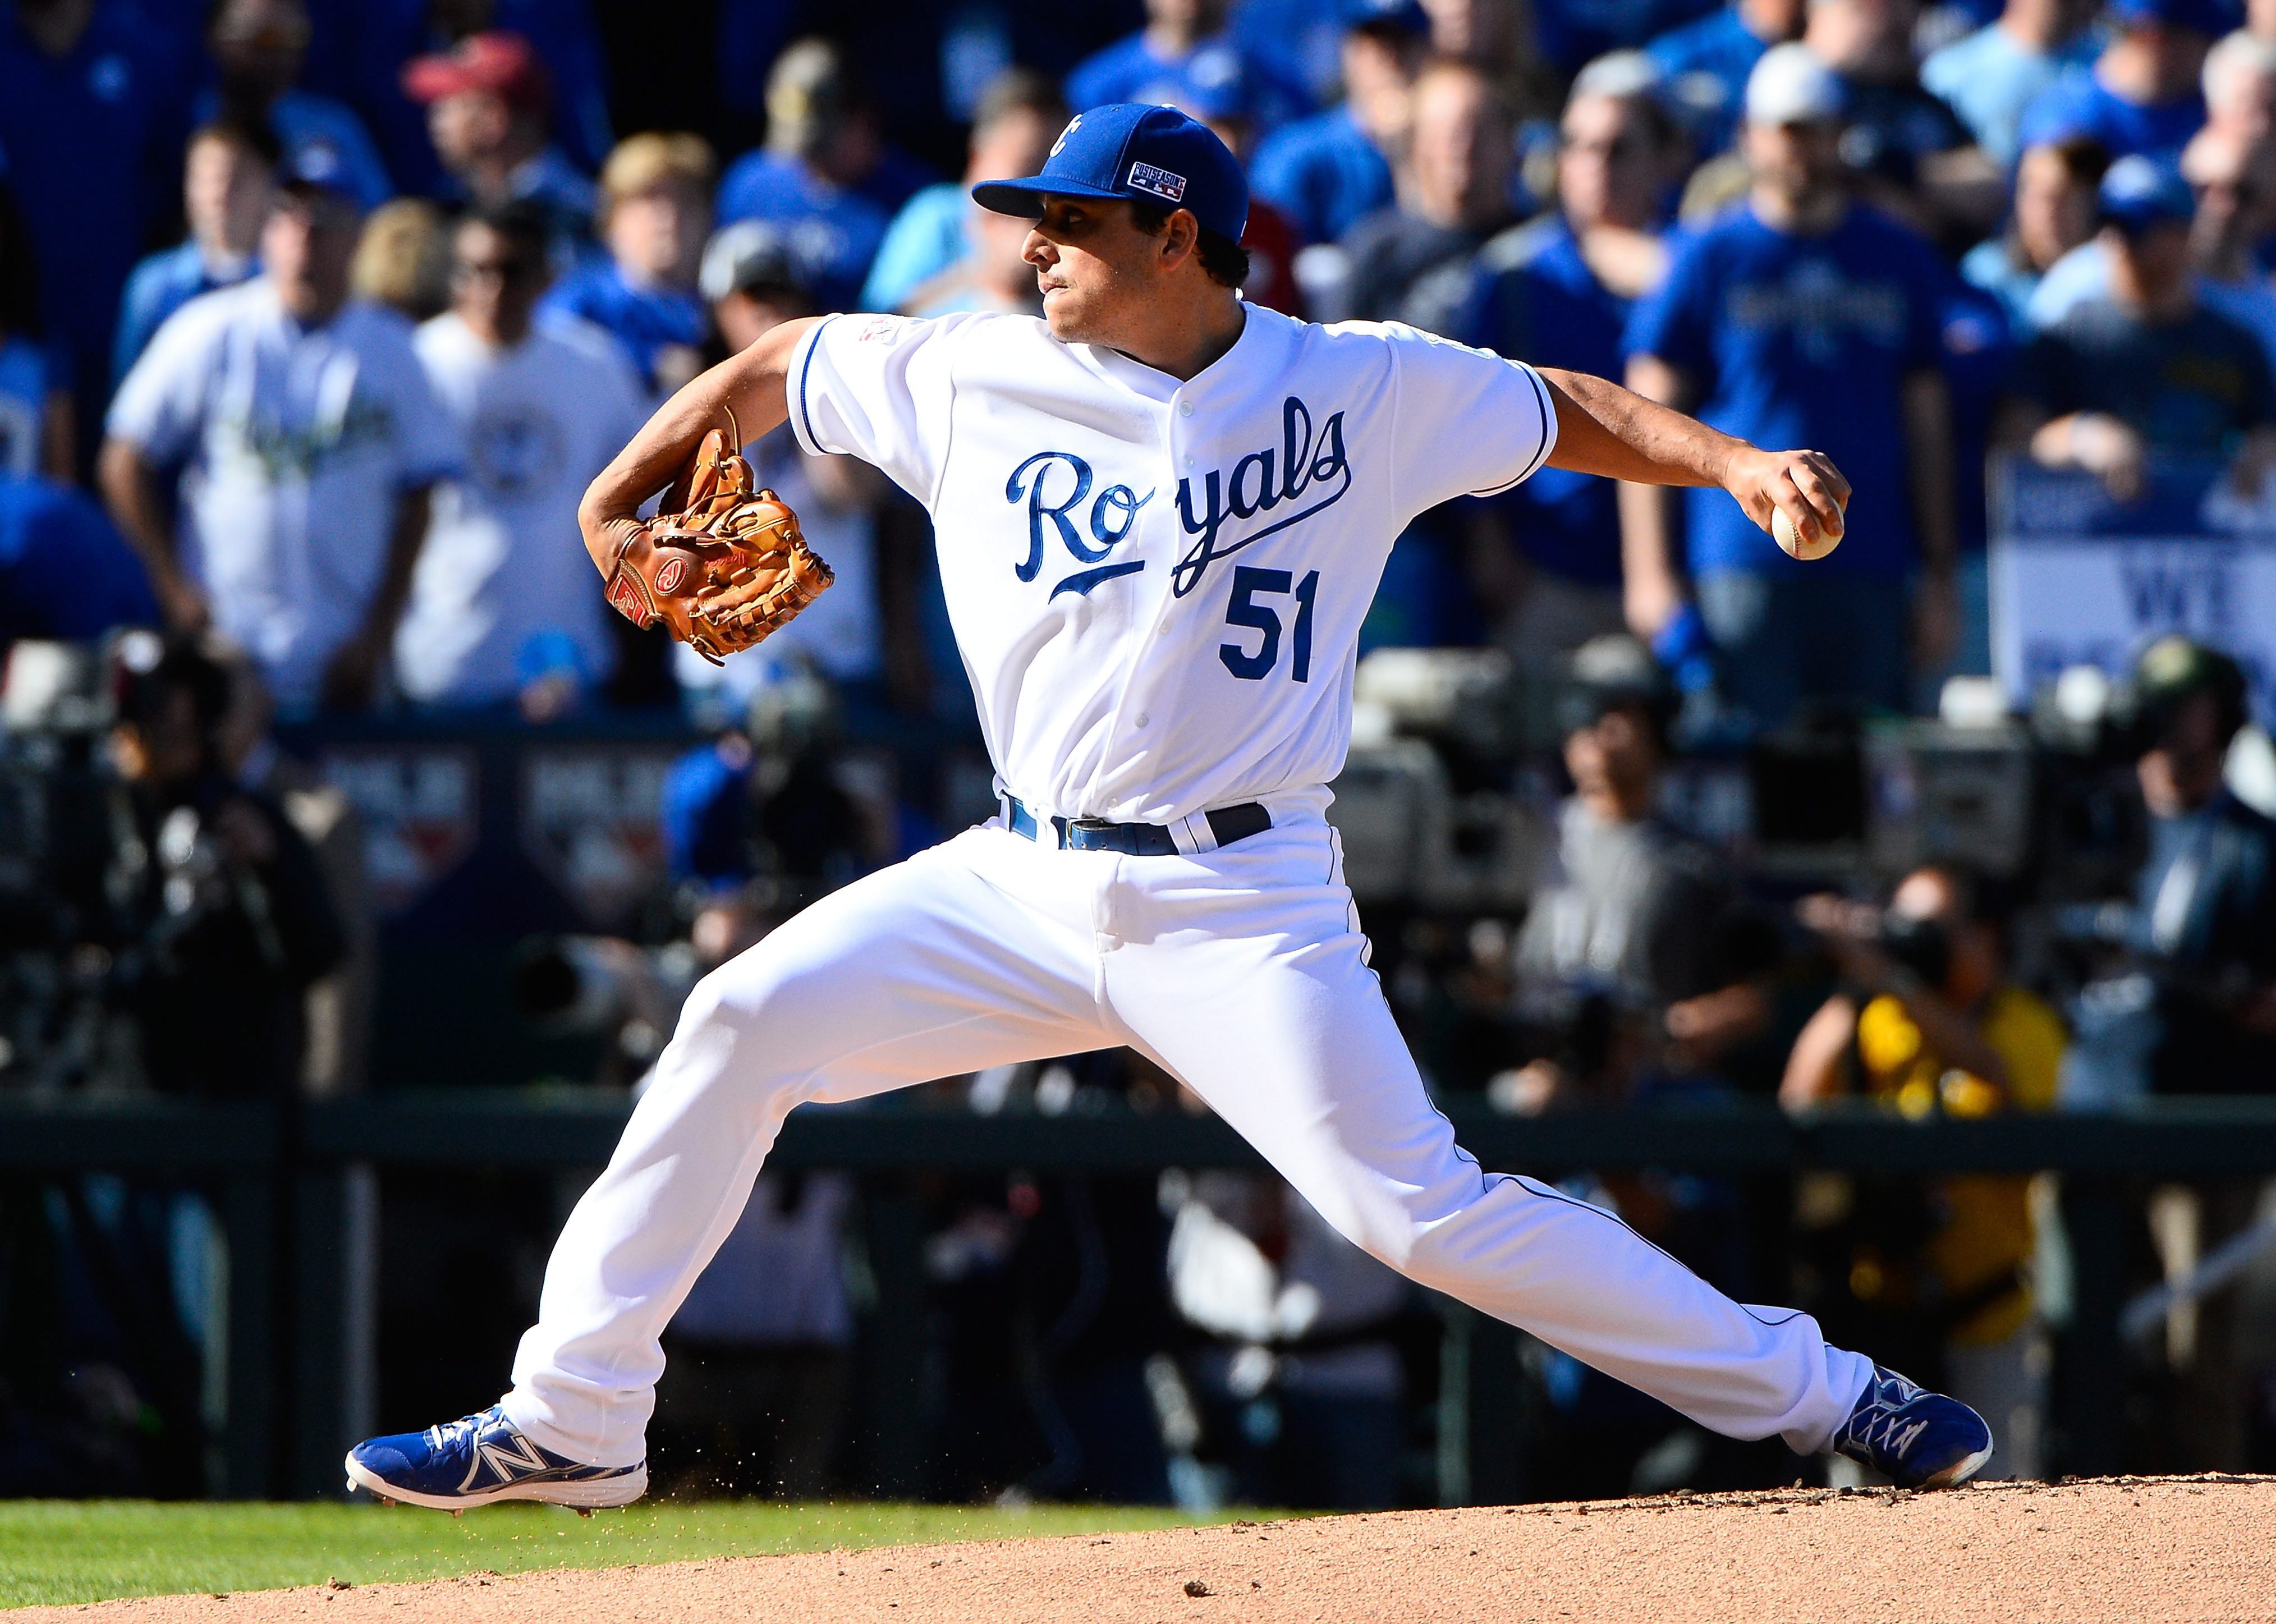 Kansas City Royals starting pitcher Jason Vargas pitches during the first inning against the Baltimore Orioles in Game Four of the American League Championship Series at Kaufman Stadium in Kansas City, Missouri on Oct. 15, 2014. (Dave Kaup—EPA)